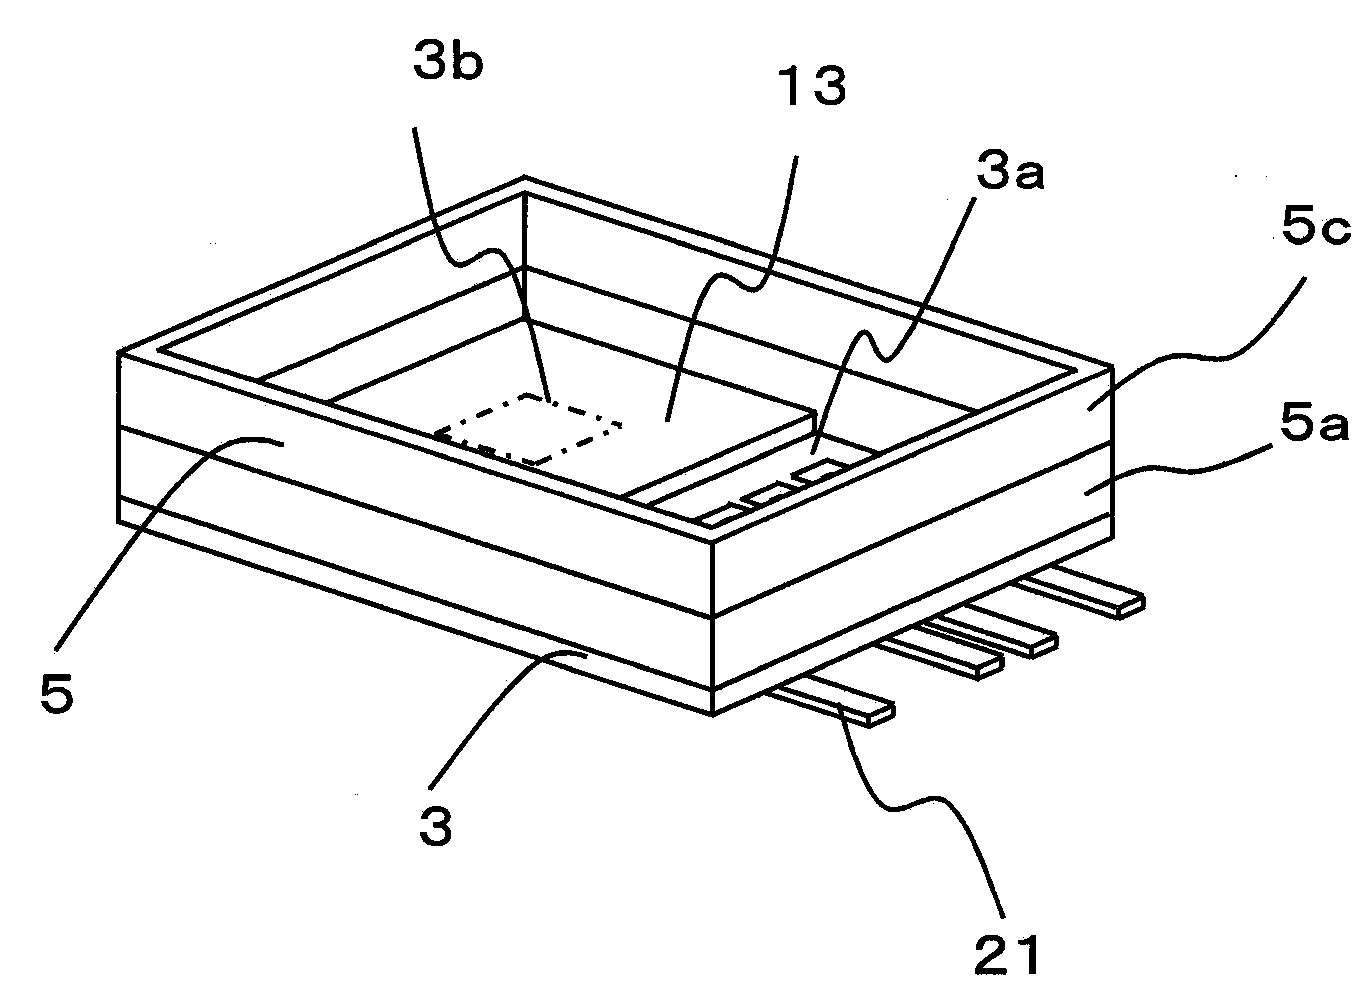 Package for housing electronic components, and electronic device